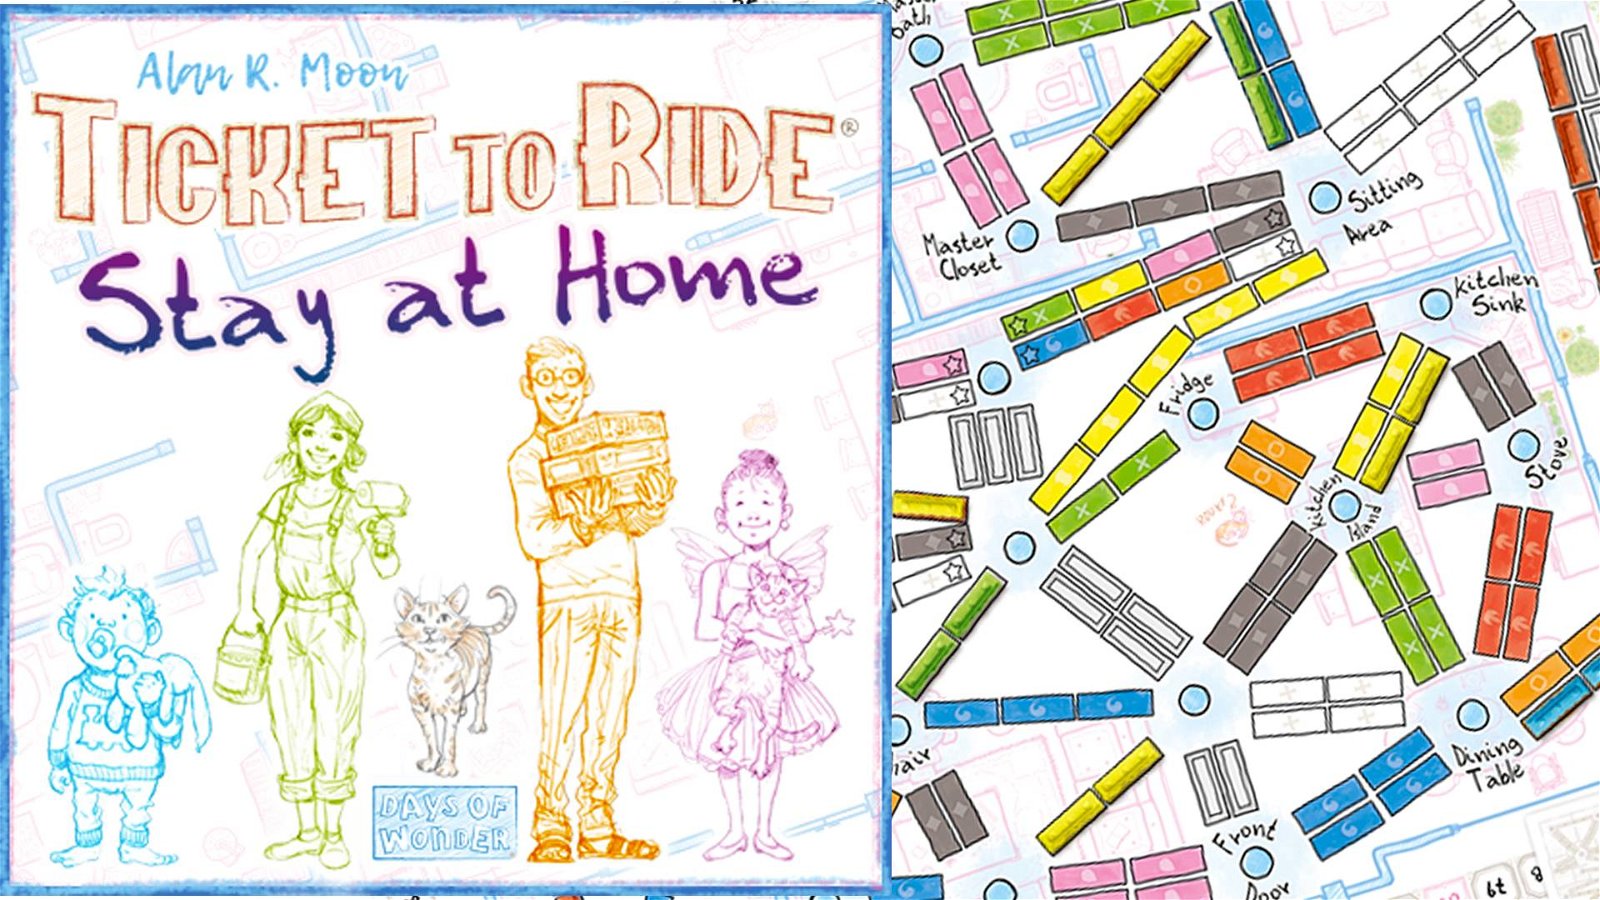 Immagine di Ticket to Ride: Stay at Home gratis in formato print and play